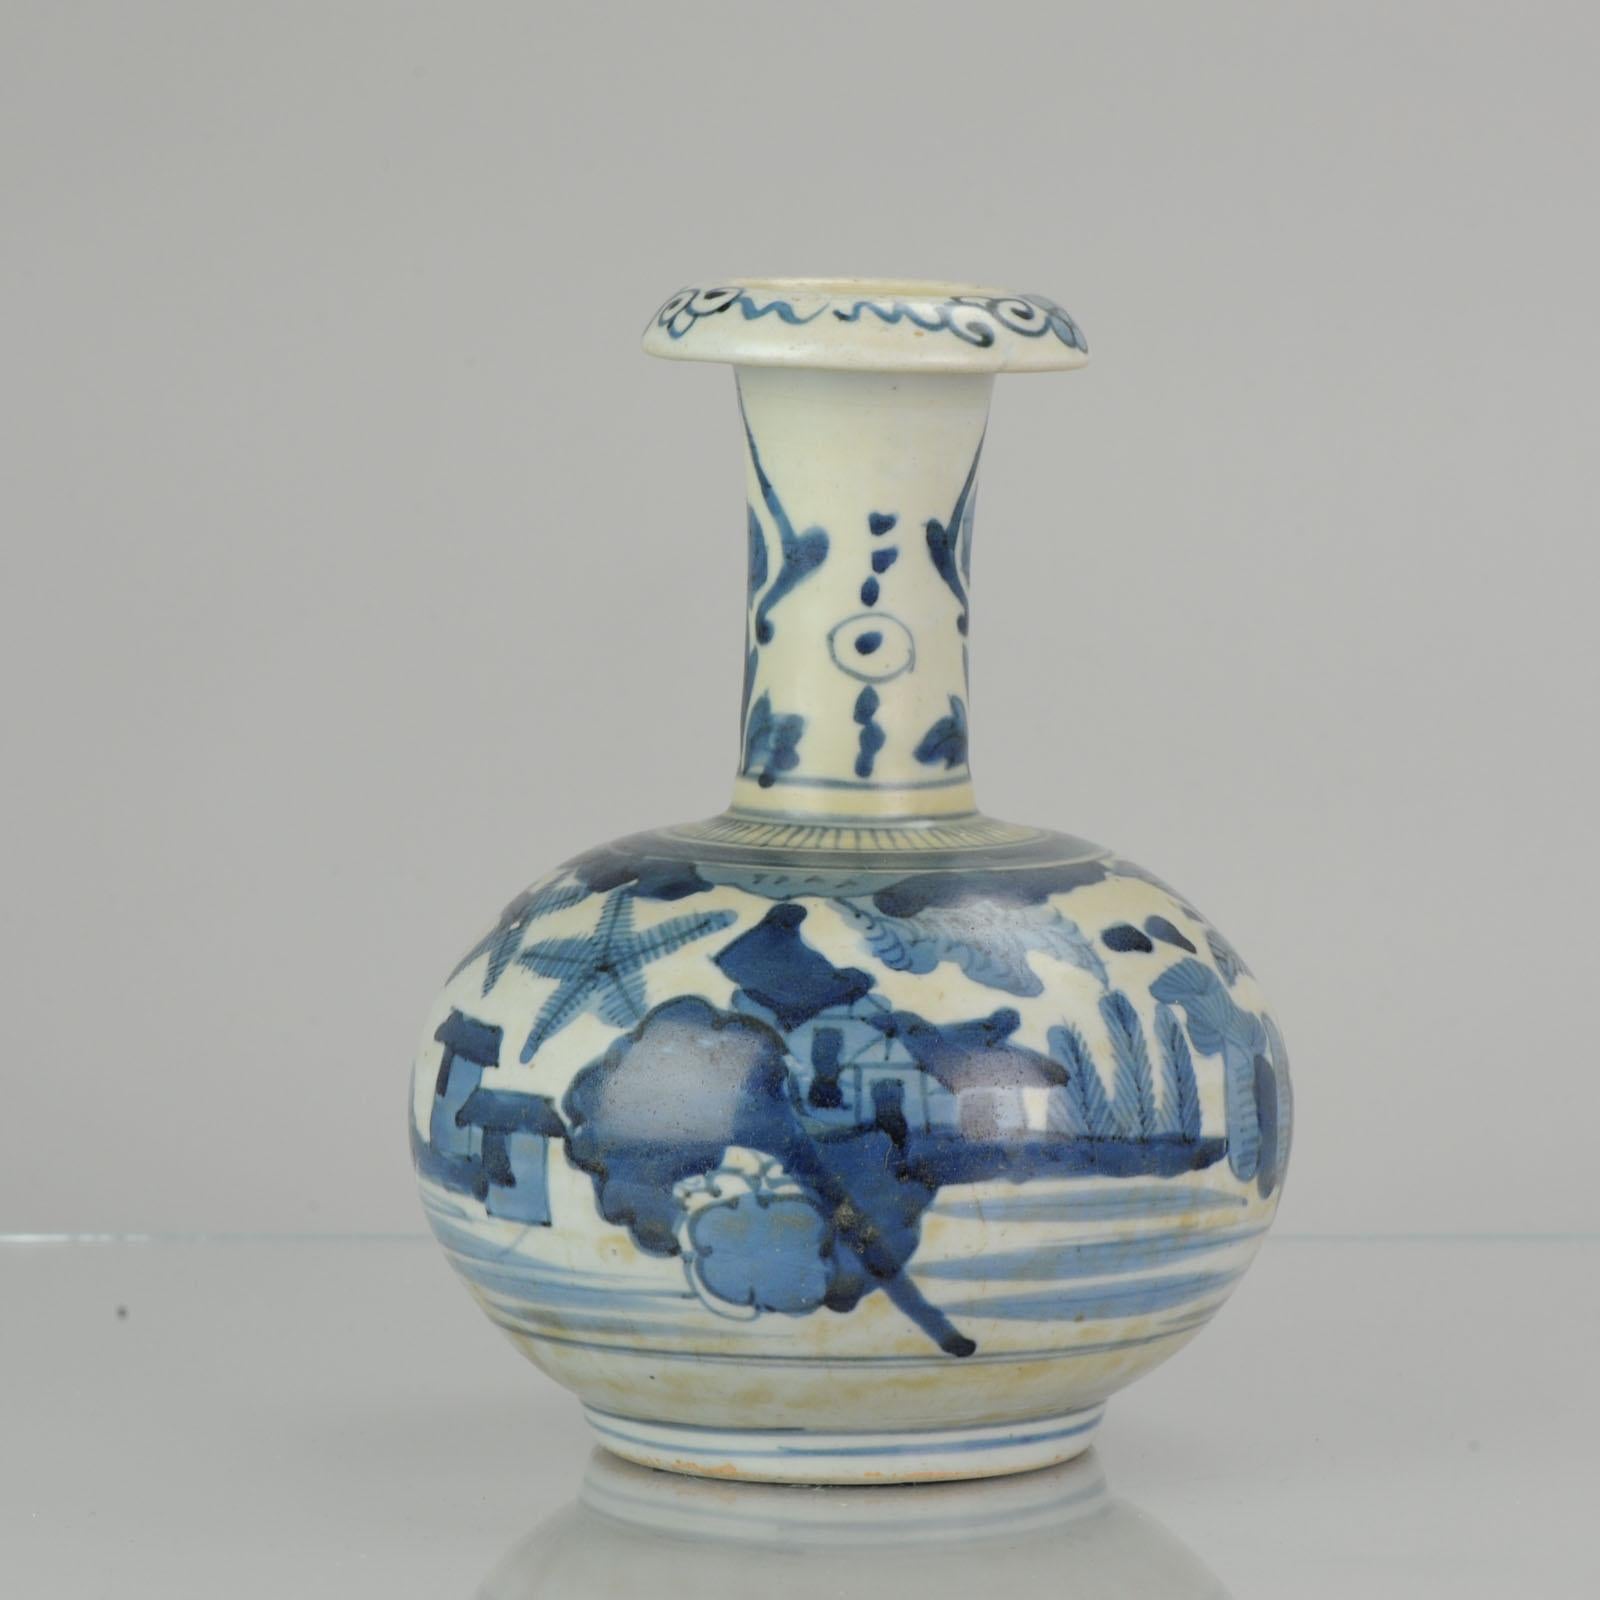 Very nice blue & White Kendi/Ghendi, 200mm high. With a floral landscape scene. Nicely carved also. Beautiful piece!

The 'kendi', a drinking water vessel with a spout but no handle, is a form distinct to Southeast Asia, where it has a long history.